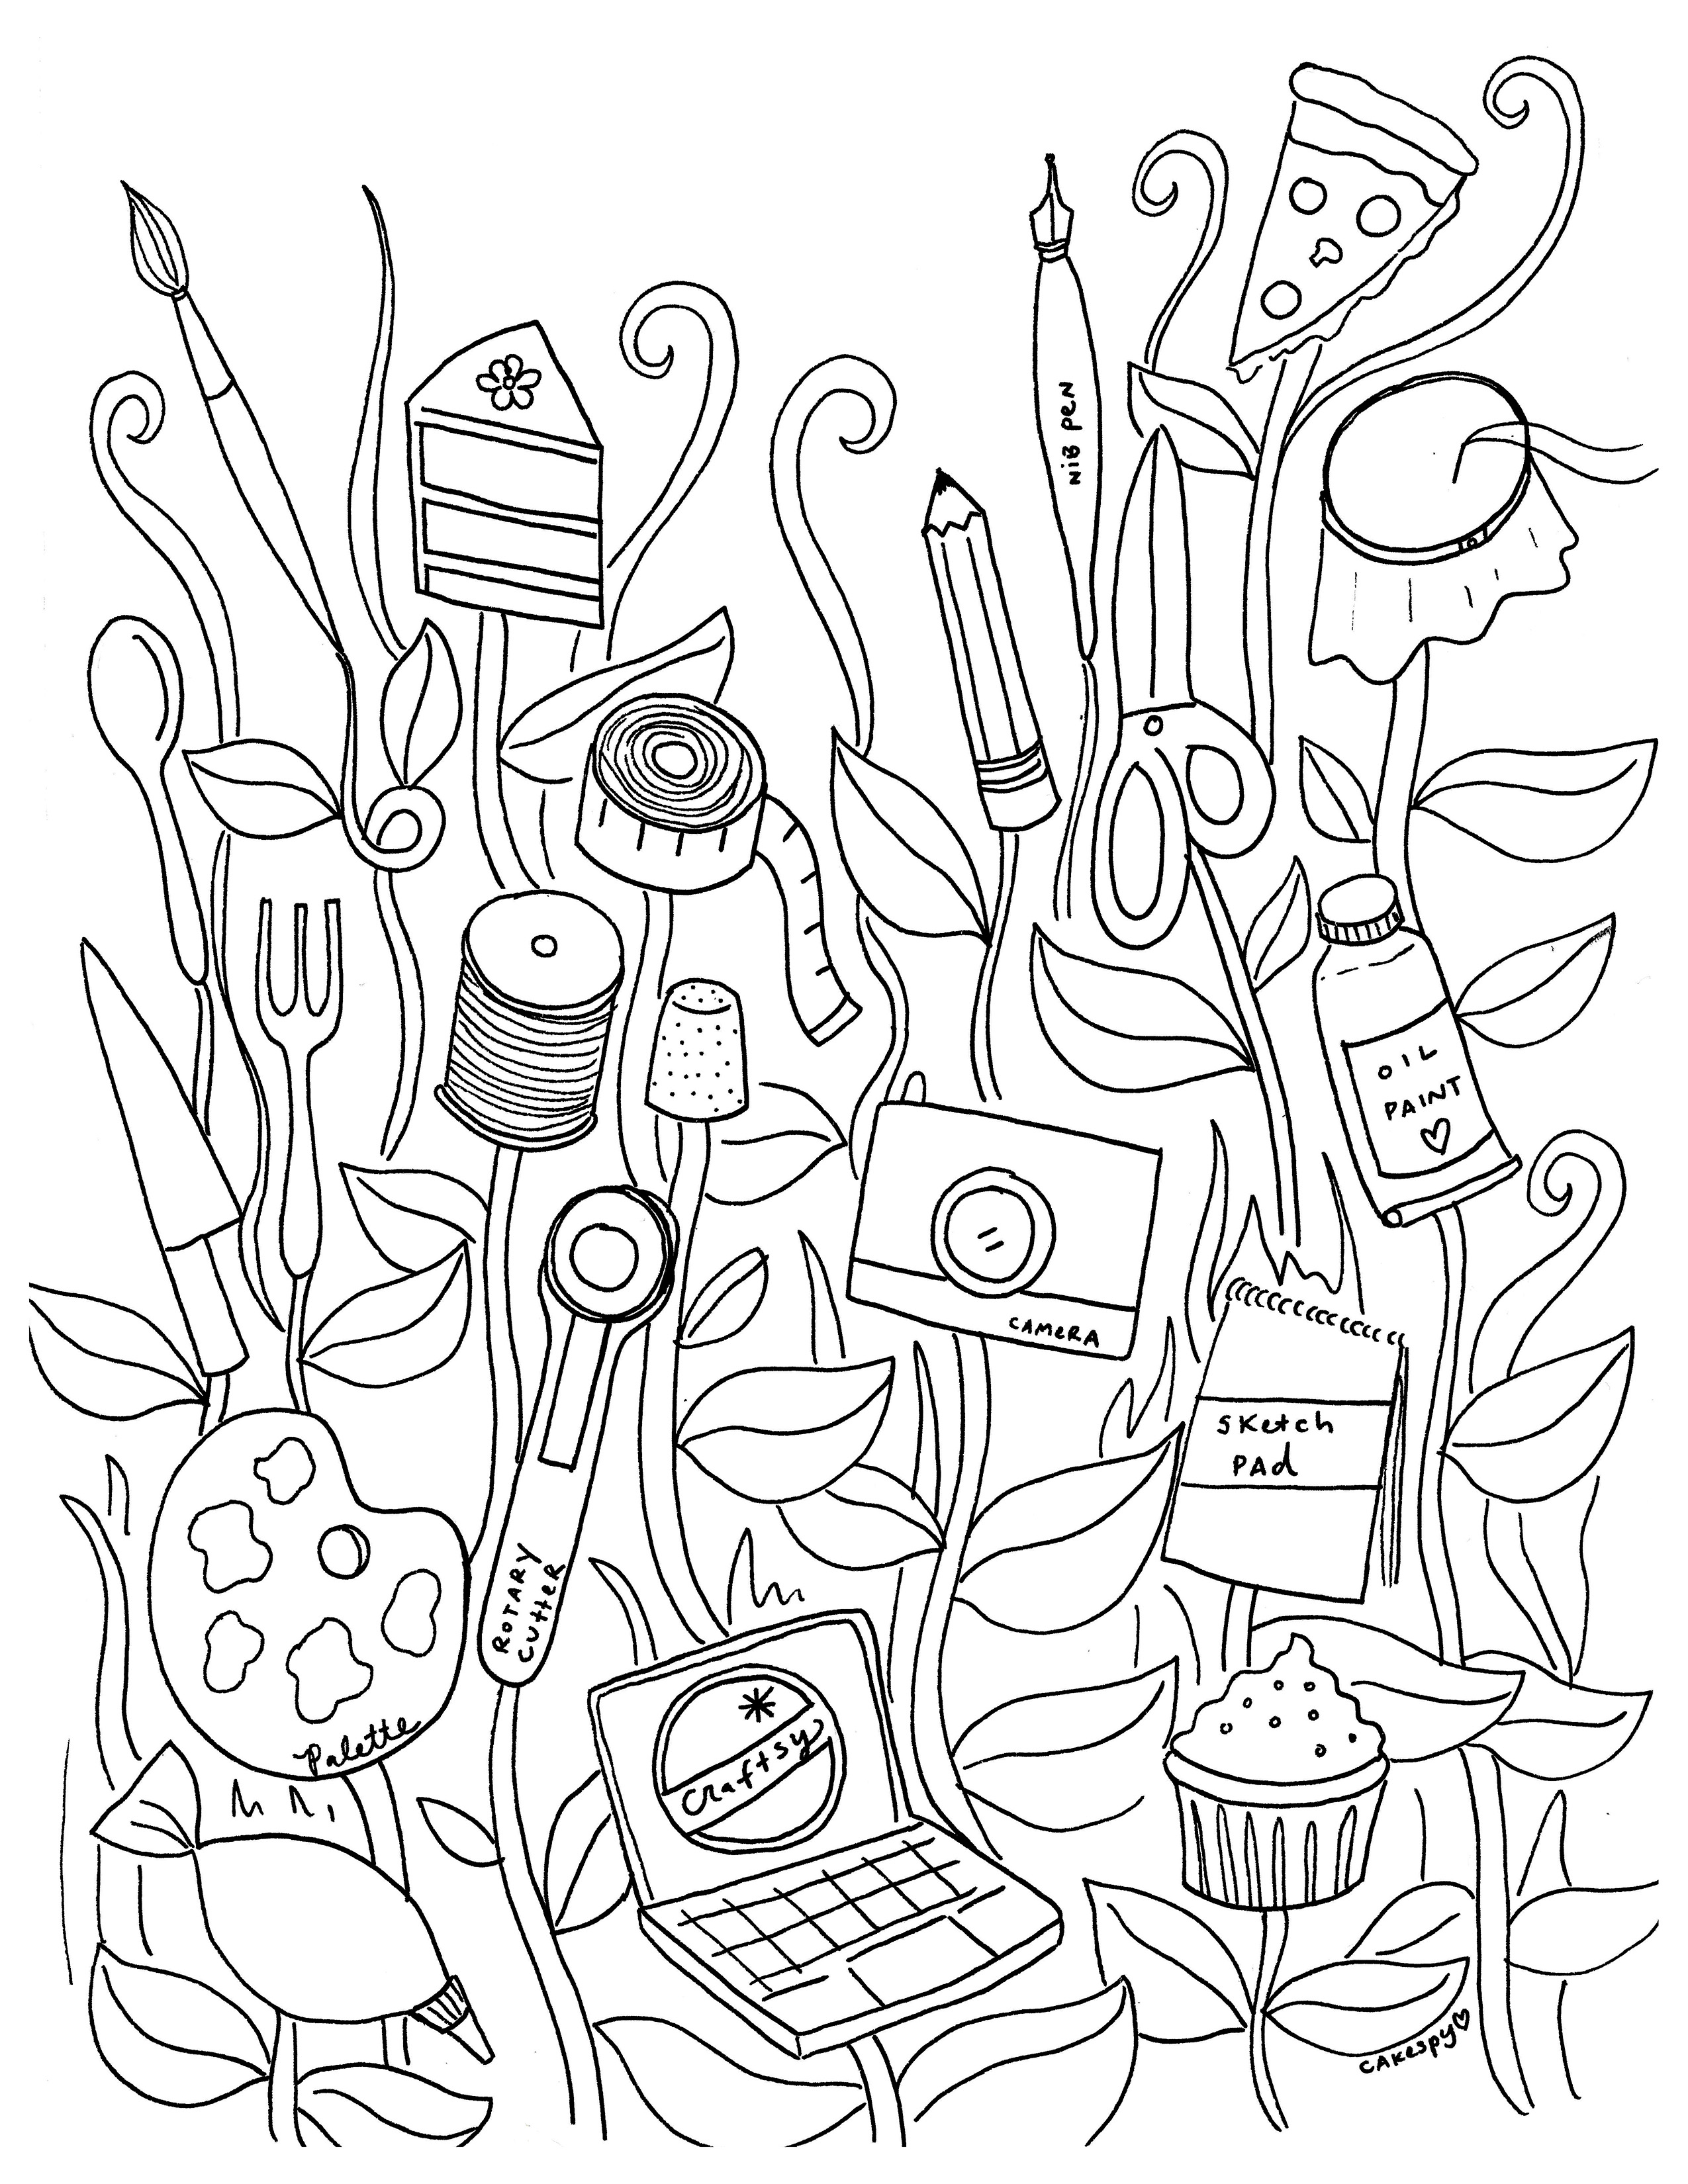 Sewing Machine Coloring Page at GetDrawings | Free download